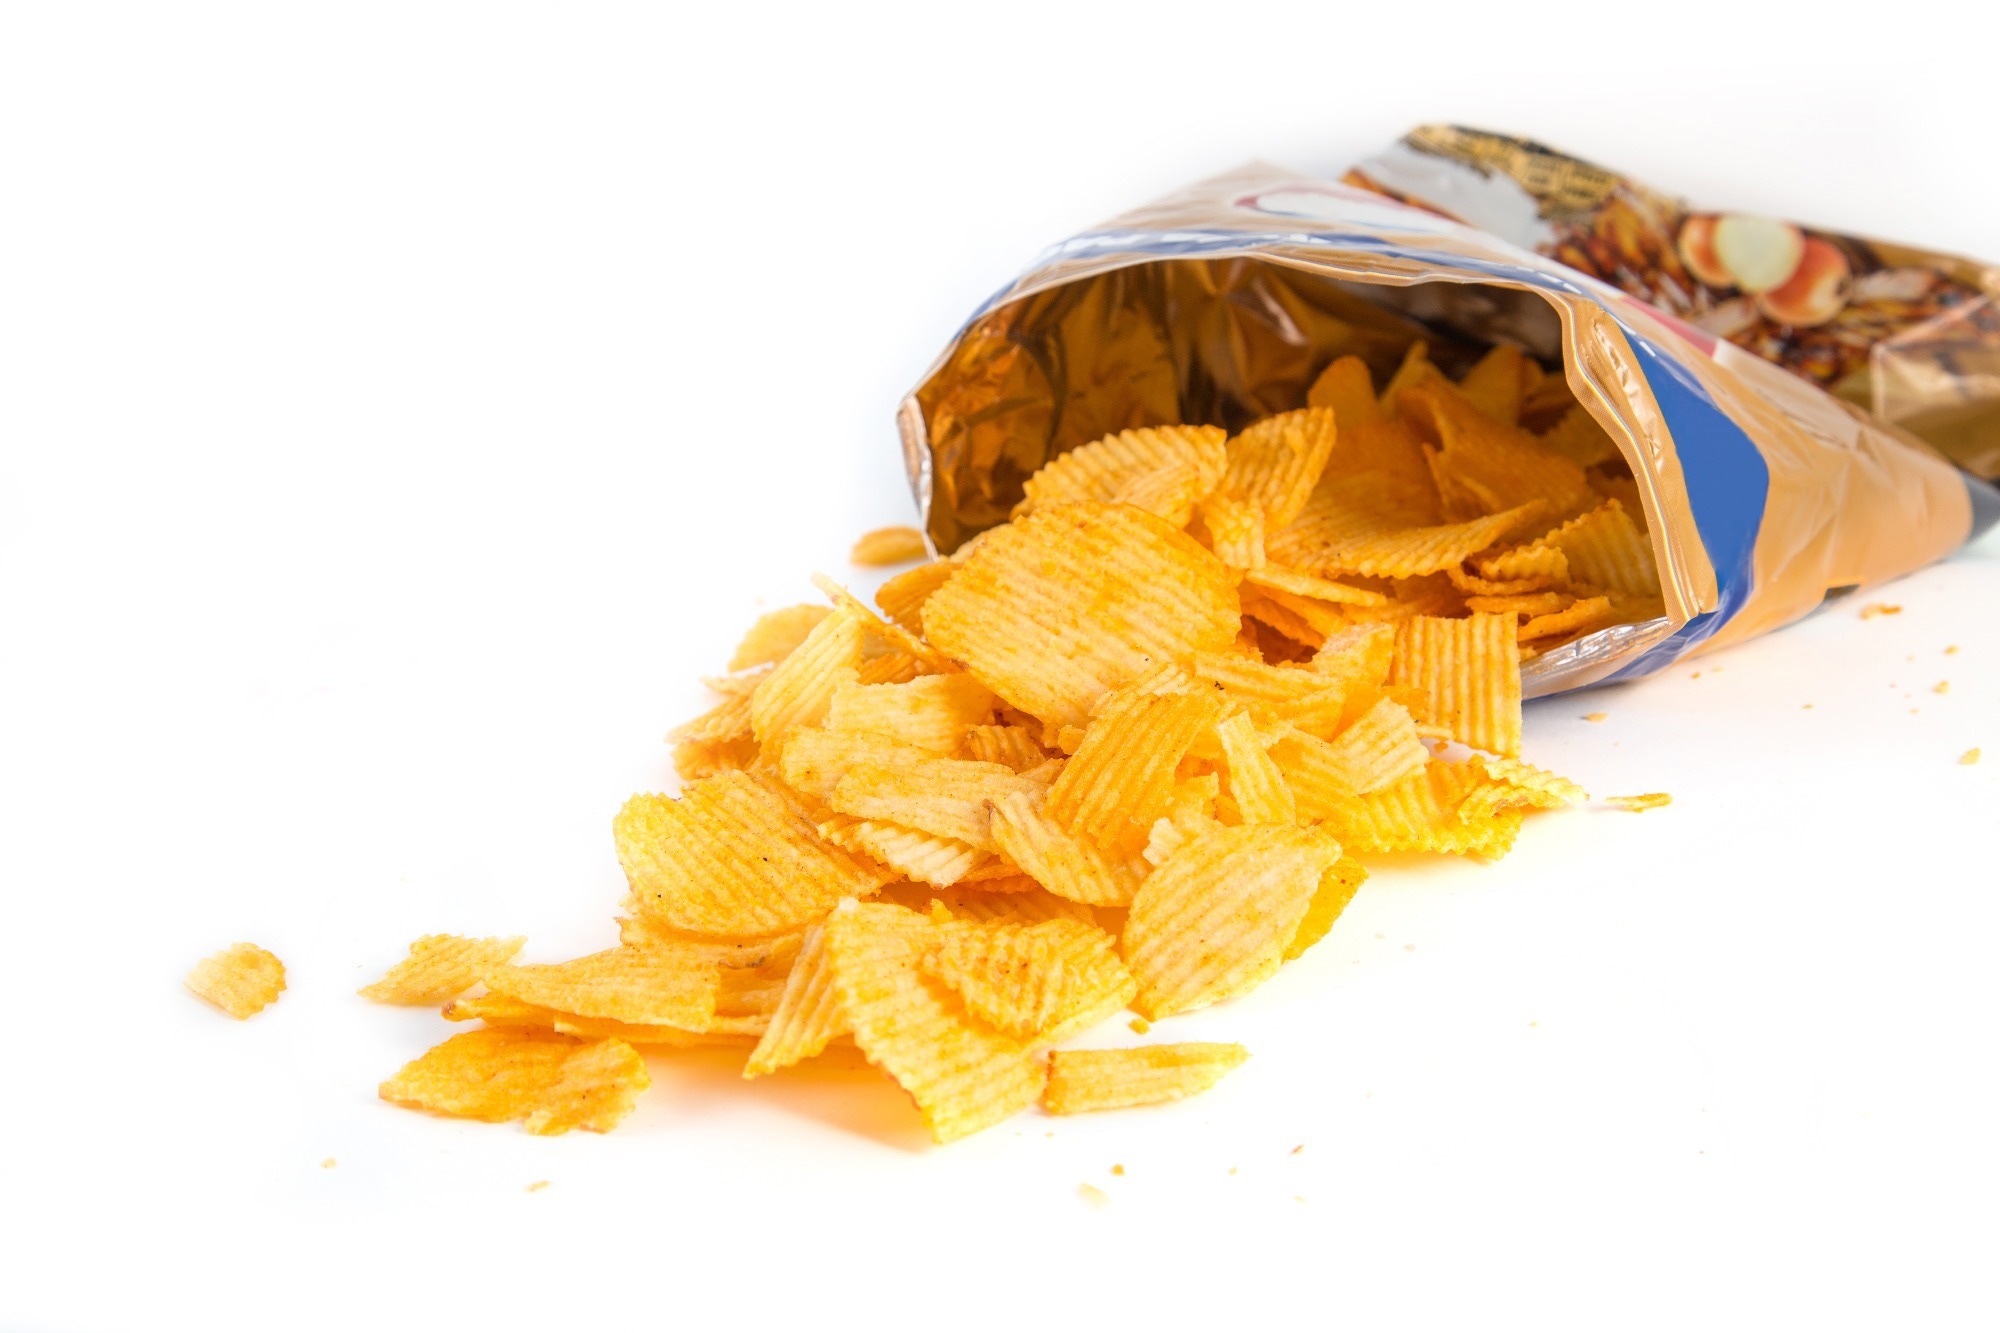 Study: Ultra-processed Foods and Human Health: From Epidemiological Evidence to Mechanistic Insights. Image Credit: Dawid Rojek / Shutterstock.com